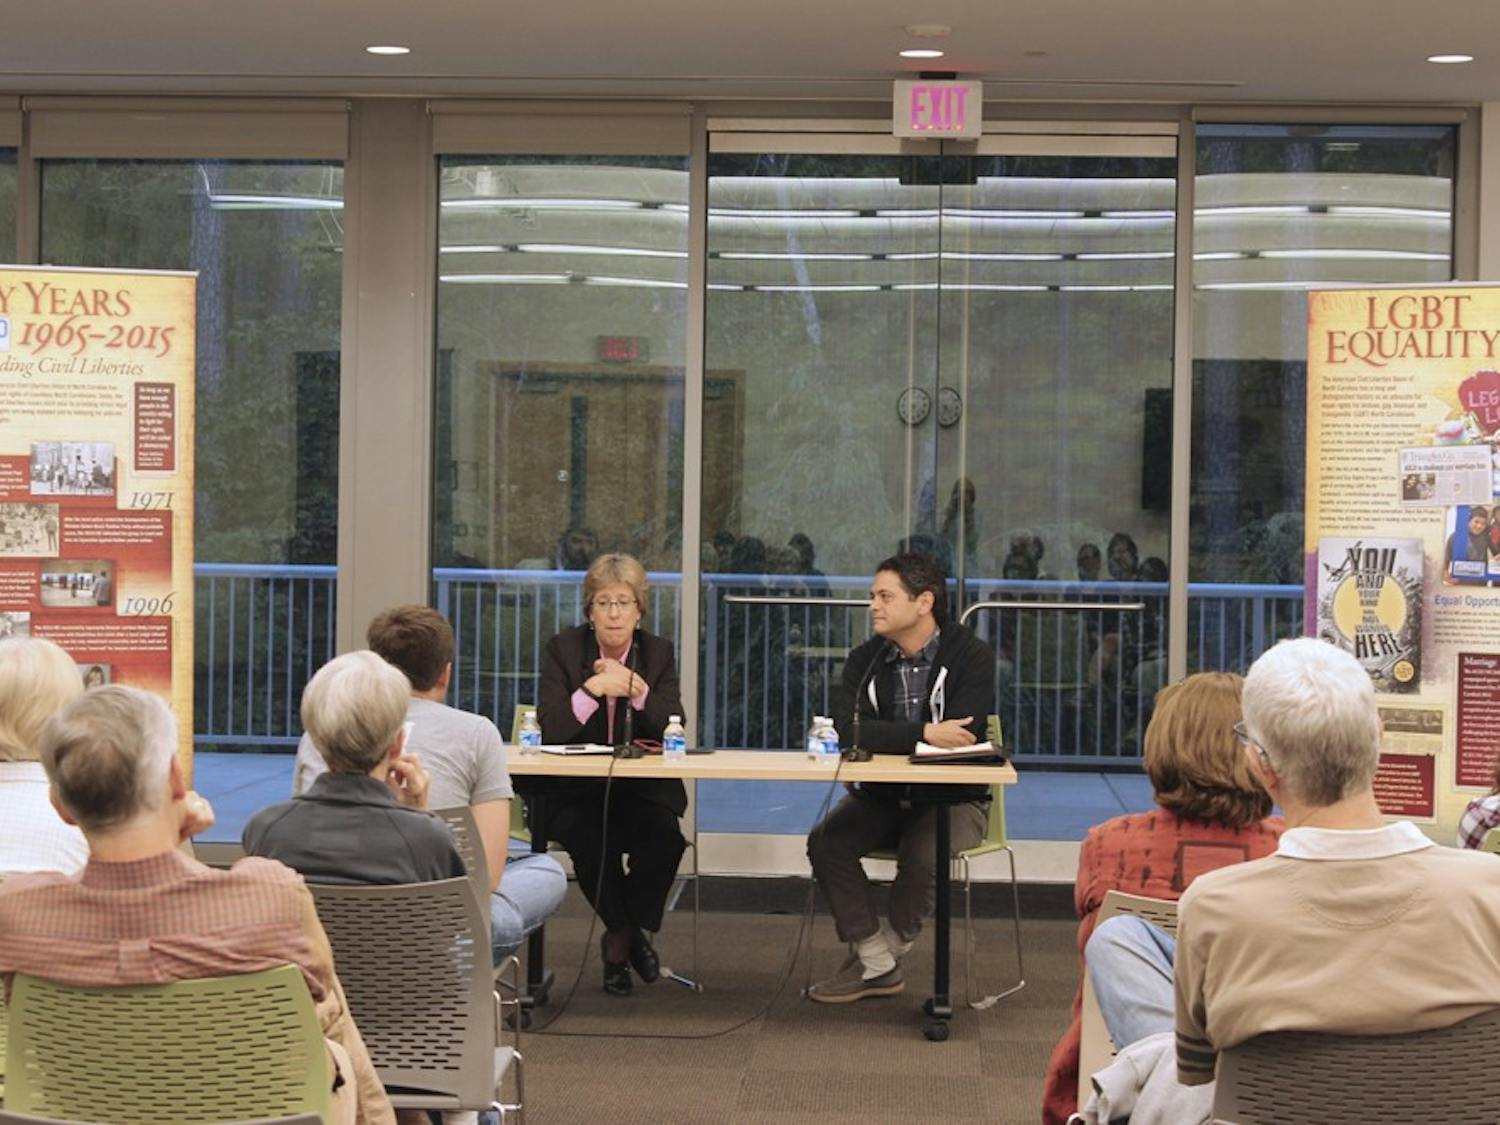 Chapel Hill mayor Mark Kleinschmidt and Carrboro mayor Lydia Lavelle host a panel discussion Monday evening at Mayor & Mayor: A Conversation about LGBTQ Struggles in North Carolina, part of the ACLU-NC 50th Anniversary Exhibit at the Chapel Hill Public Library.